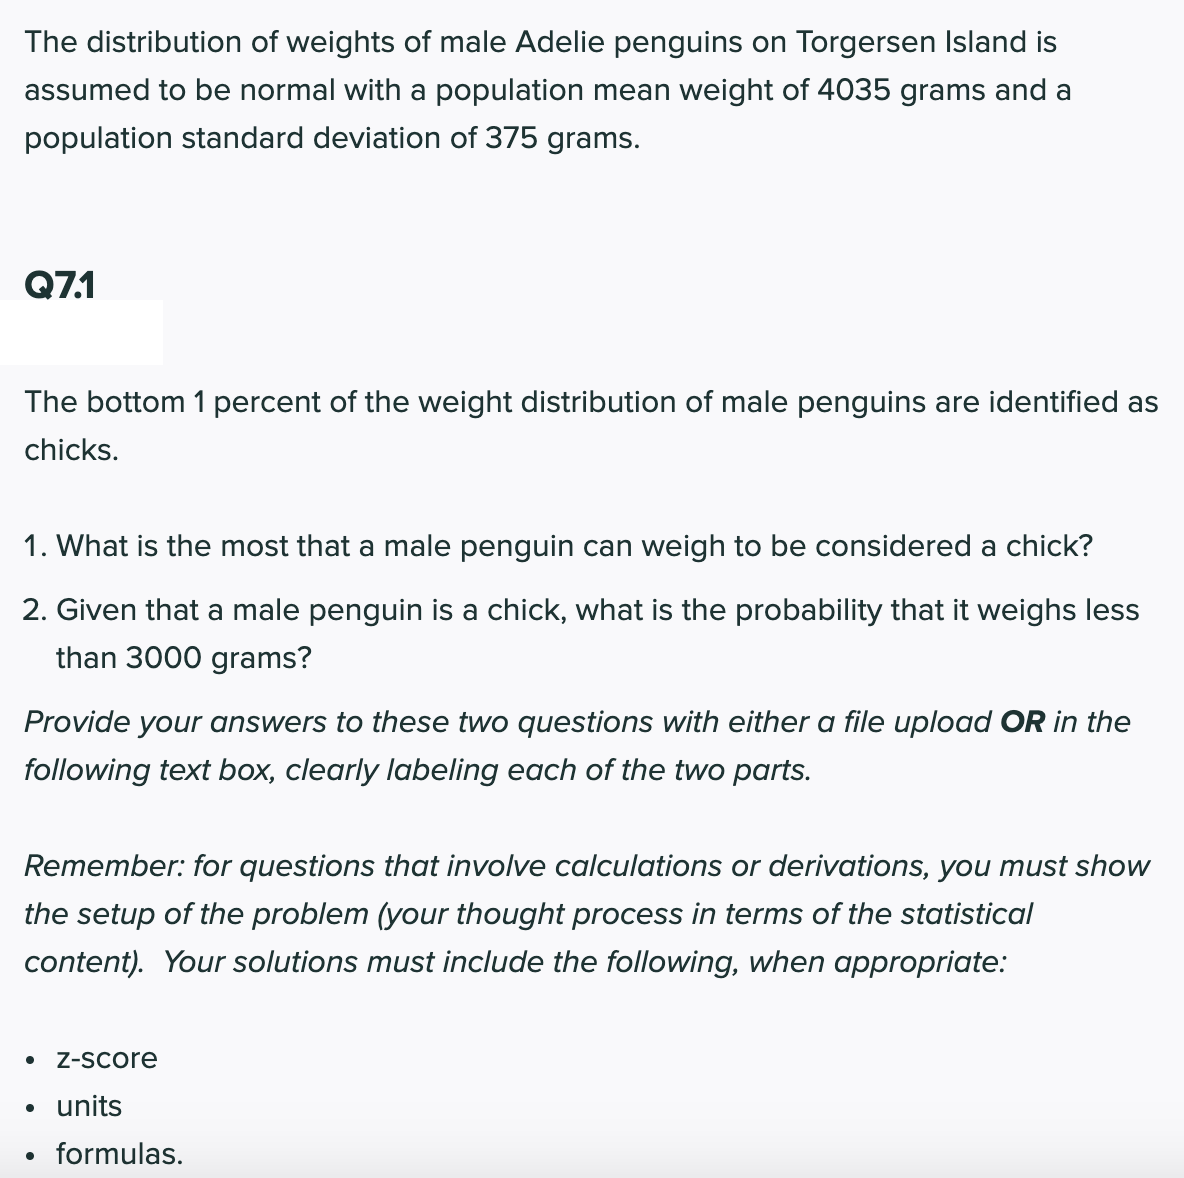 The distribution of weights of male Adelie penguins on Torgersen Island is
assumed to be normal with a population mean weight of 4035 grams and a
population standard deviation of 375 grams.
Q7.1
The bottom 1 percent of the weight distribution of male penguins are identified as
chicks.
1. What is the most that a male penguin can weigh to be considered a chick?
2. Given that a male penguin is a chick, what is the probability that it weighs less
than 3000 grams?
Provide your answers to these two questions with either a file upload OR in the
following text box, clearly labeling each of the two parts.
Remember: for questions that involve calculations or derivations, you must show
the setup of the problem (your thought process in terms of the statistical
content). Your solutions must include the following, when appropriate:
Z-Score
• units
formulas.
